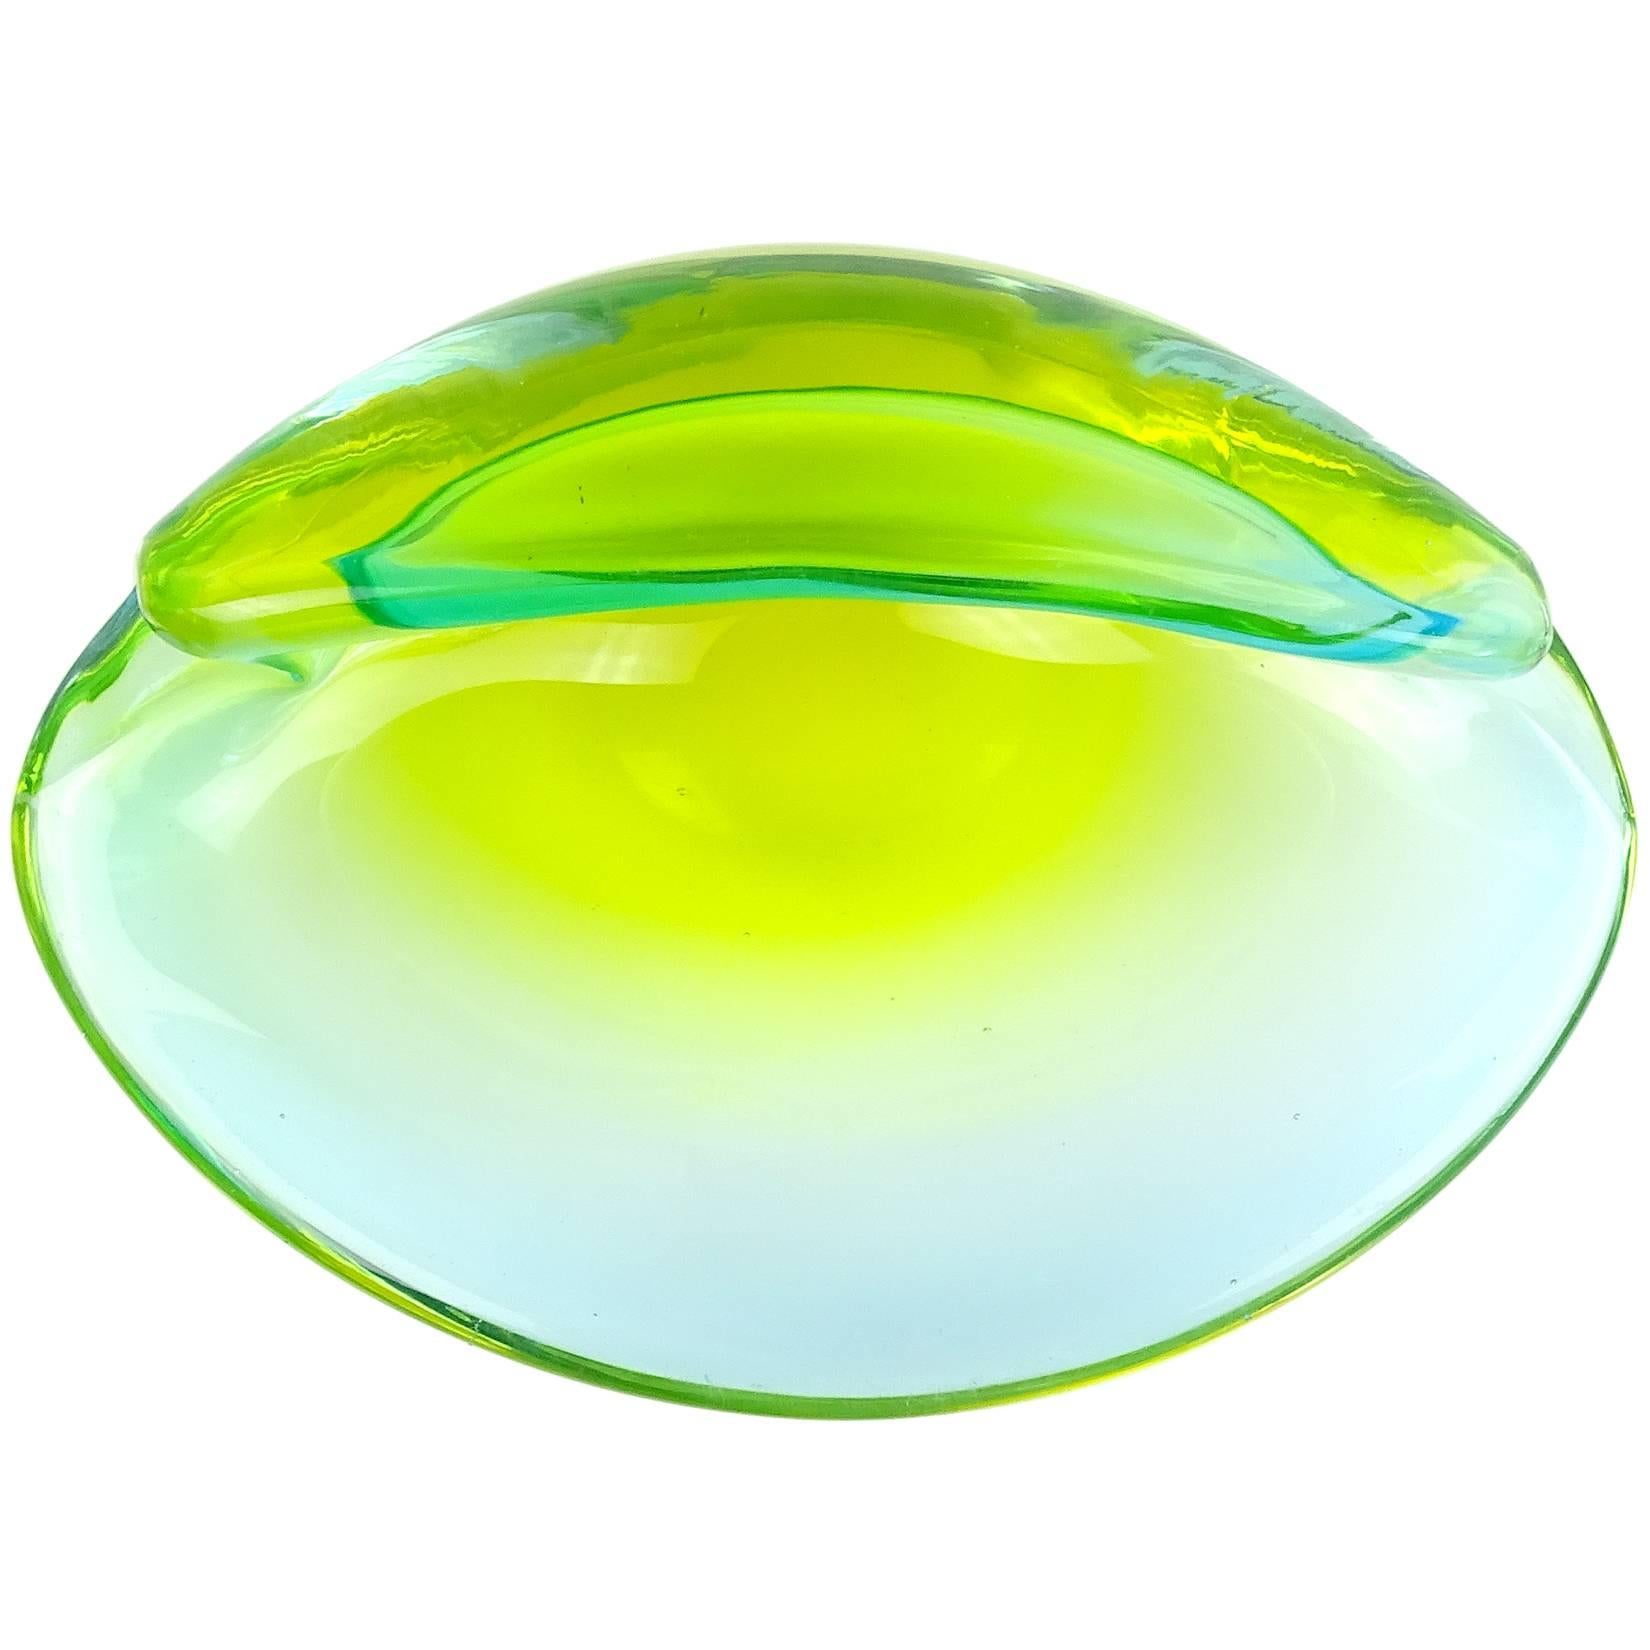 Beautiful Murano hand blown Sommerso yellow green with hints of blue, Italian art glass clam shell decorative bowl. Documented to the Cenedese company. Measures 7 1/4" long.